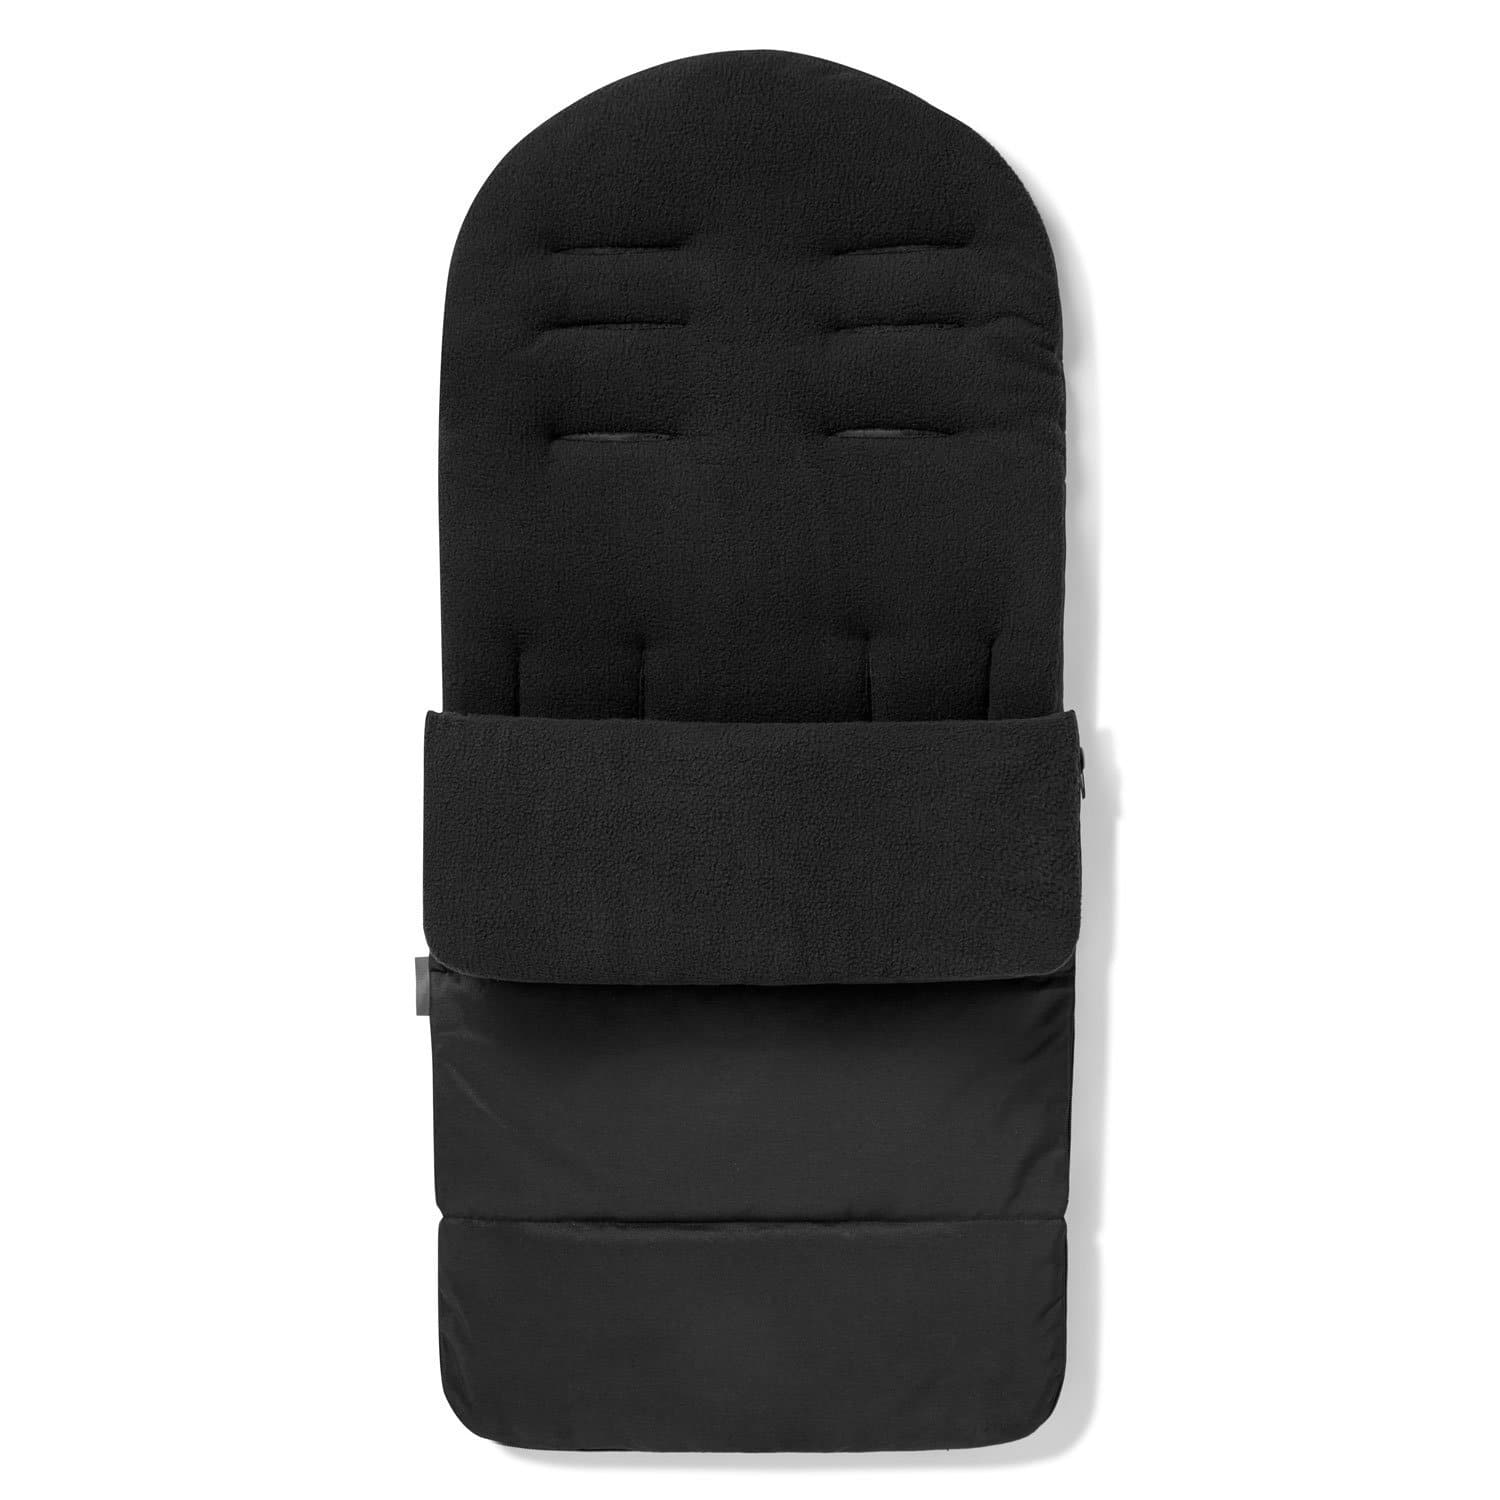 Premium Footmuff / Cosy Toes Compatible with Casual - Black Jack / Fits All Models | For Your Little One